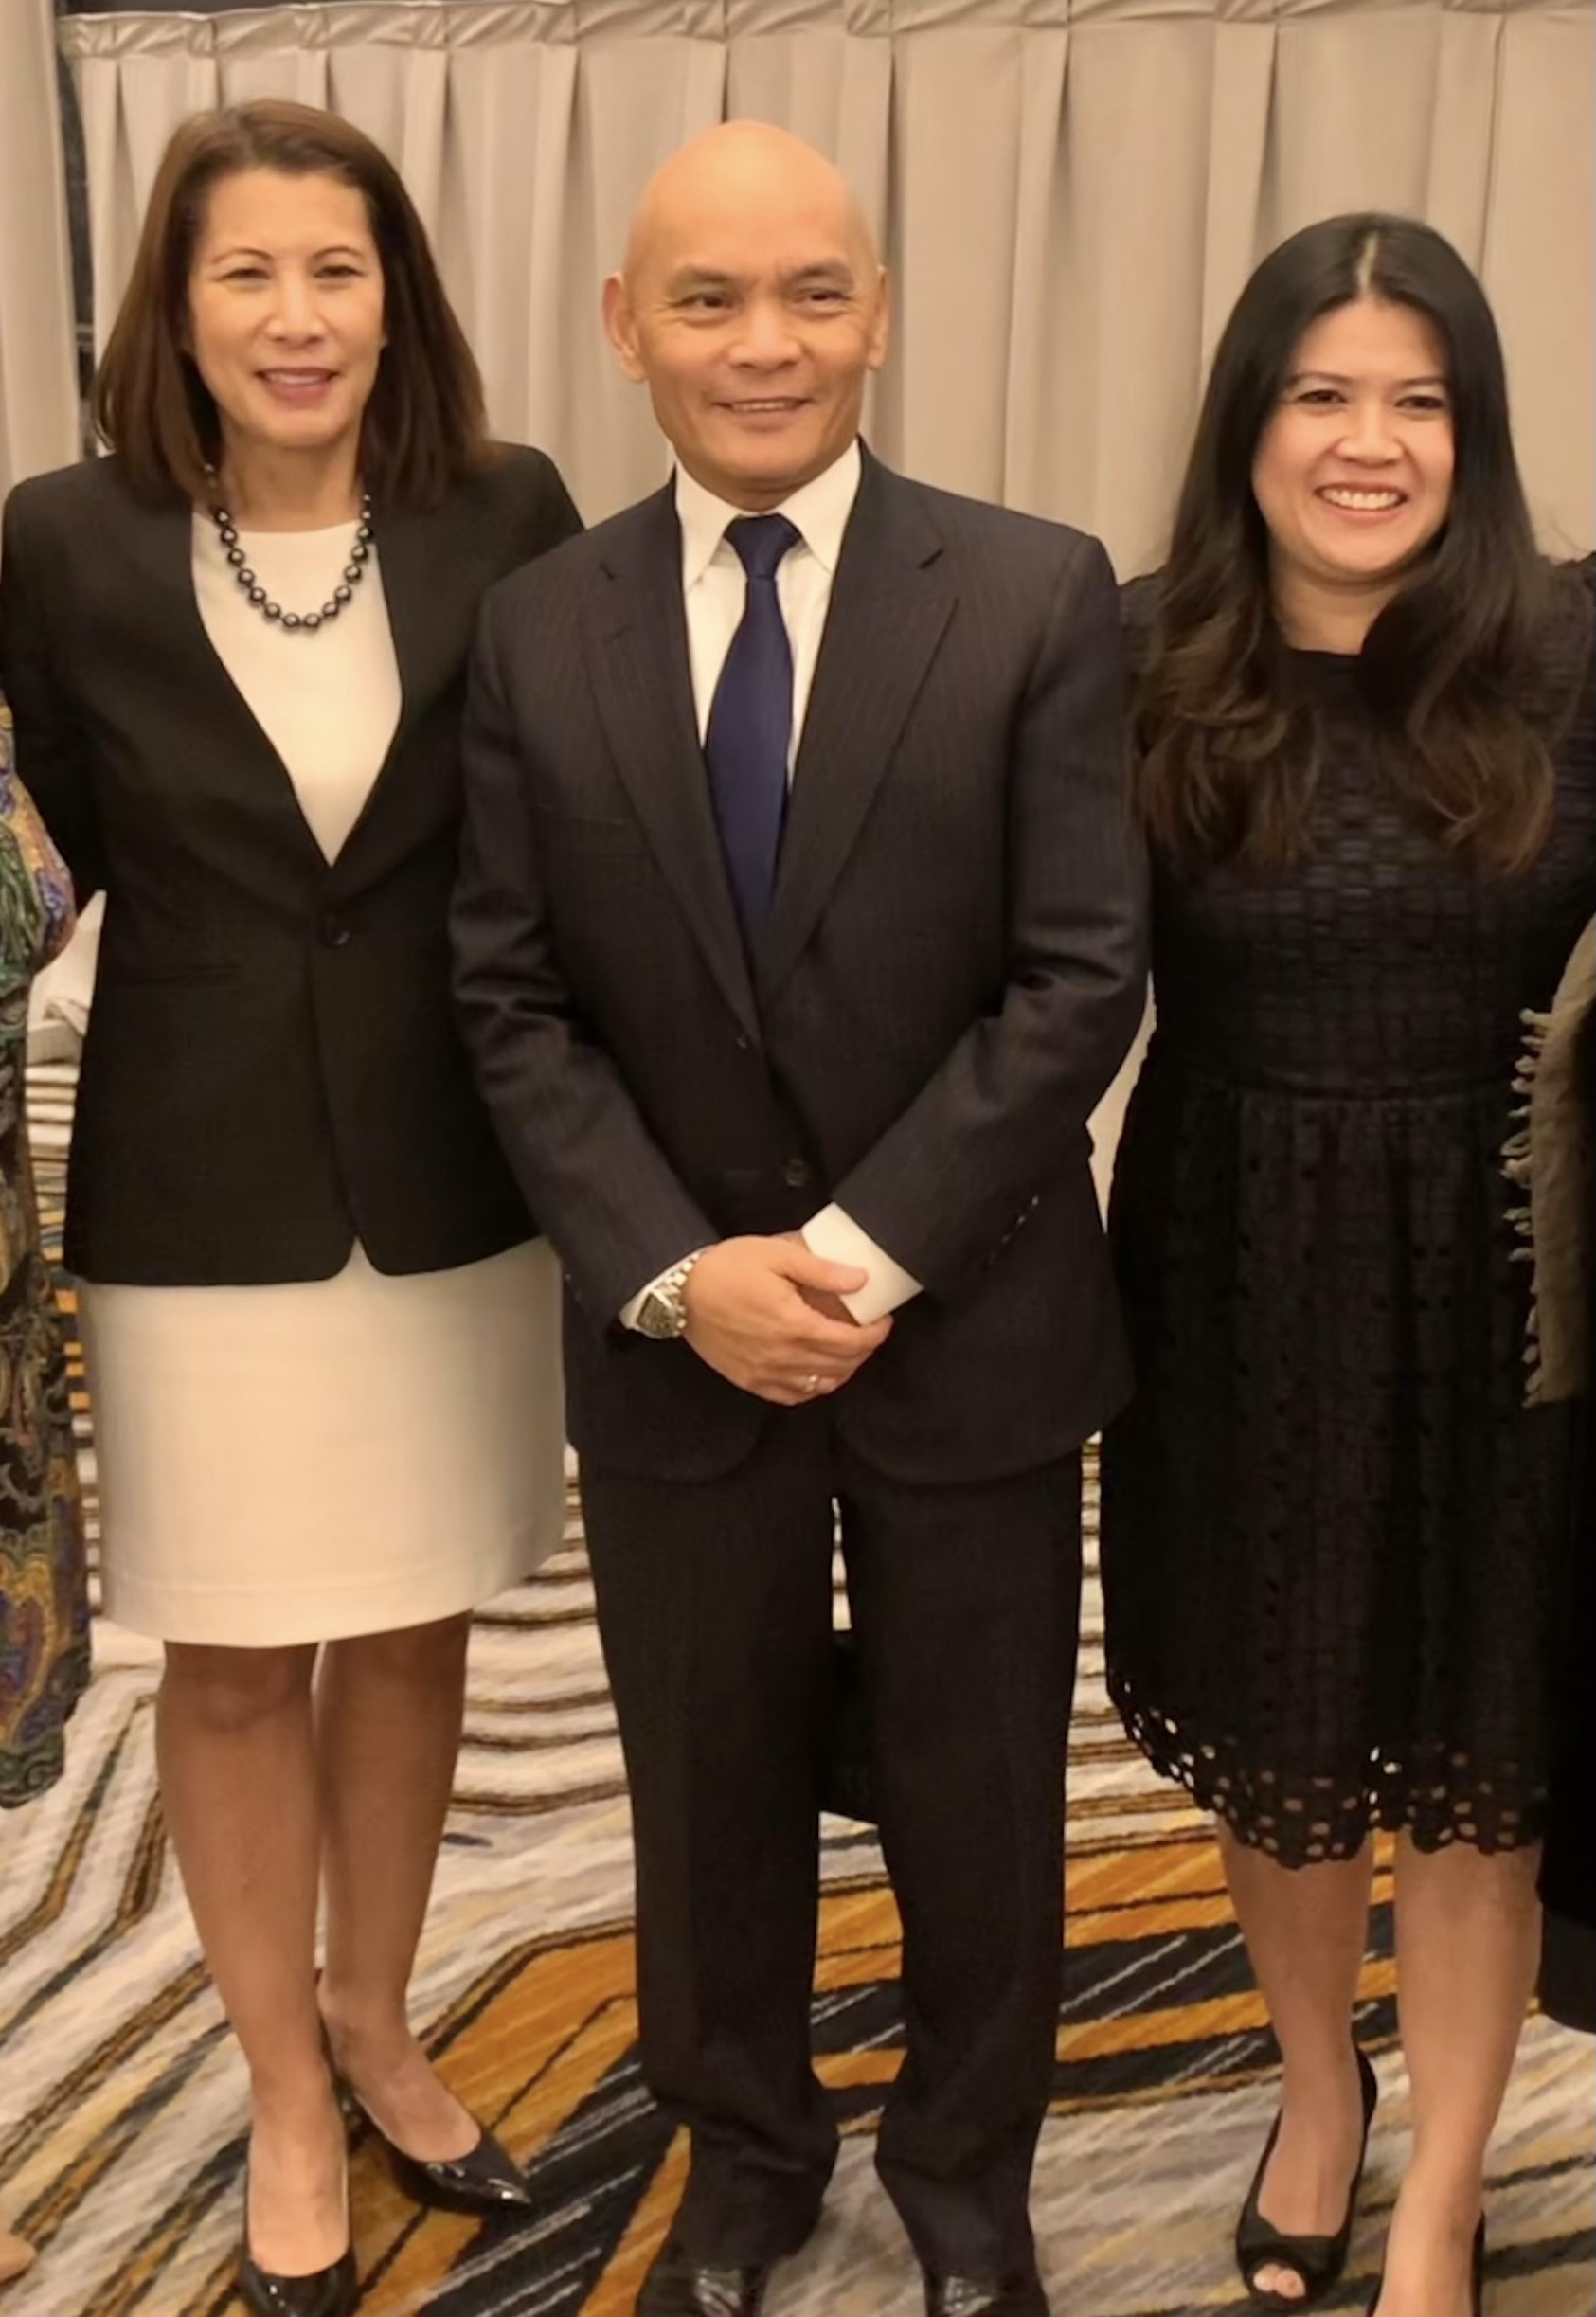 Attorney Ed Tegade with his wife, Anna (right) and former Chief Justice of the Supreme Court of California Tani Cantile-Sakauye at his recent induction as president of the Association of Defense Counsel.